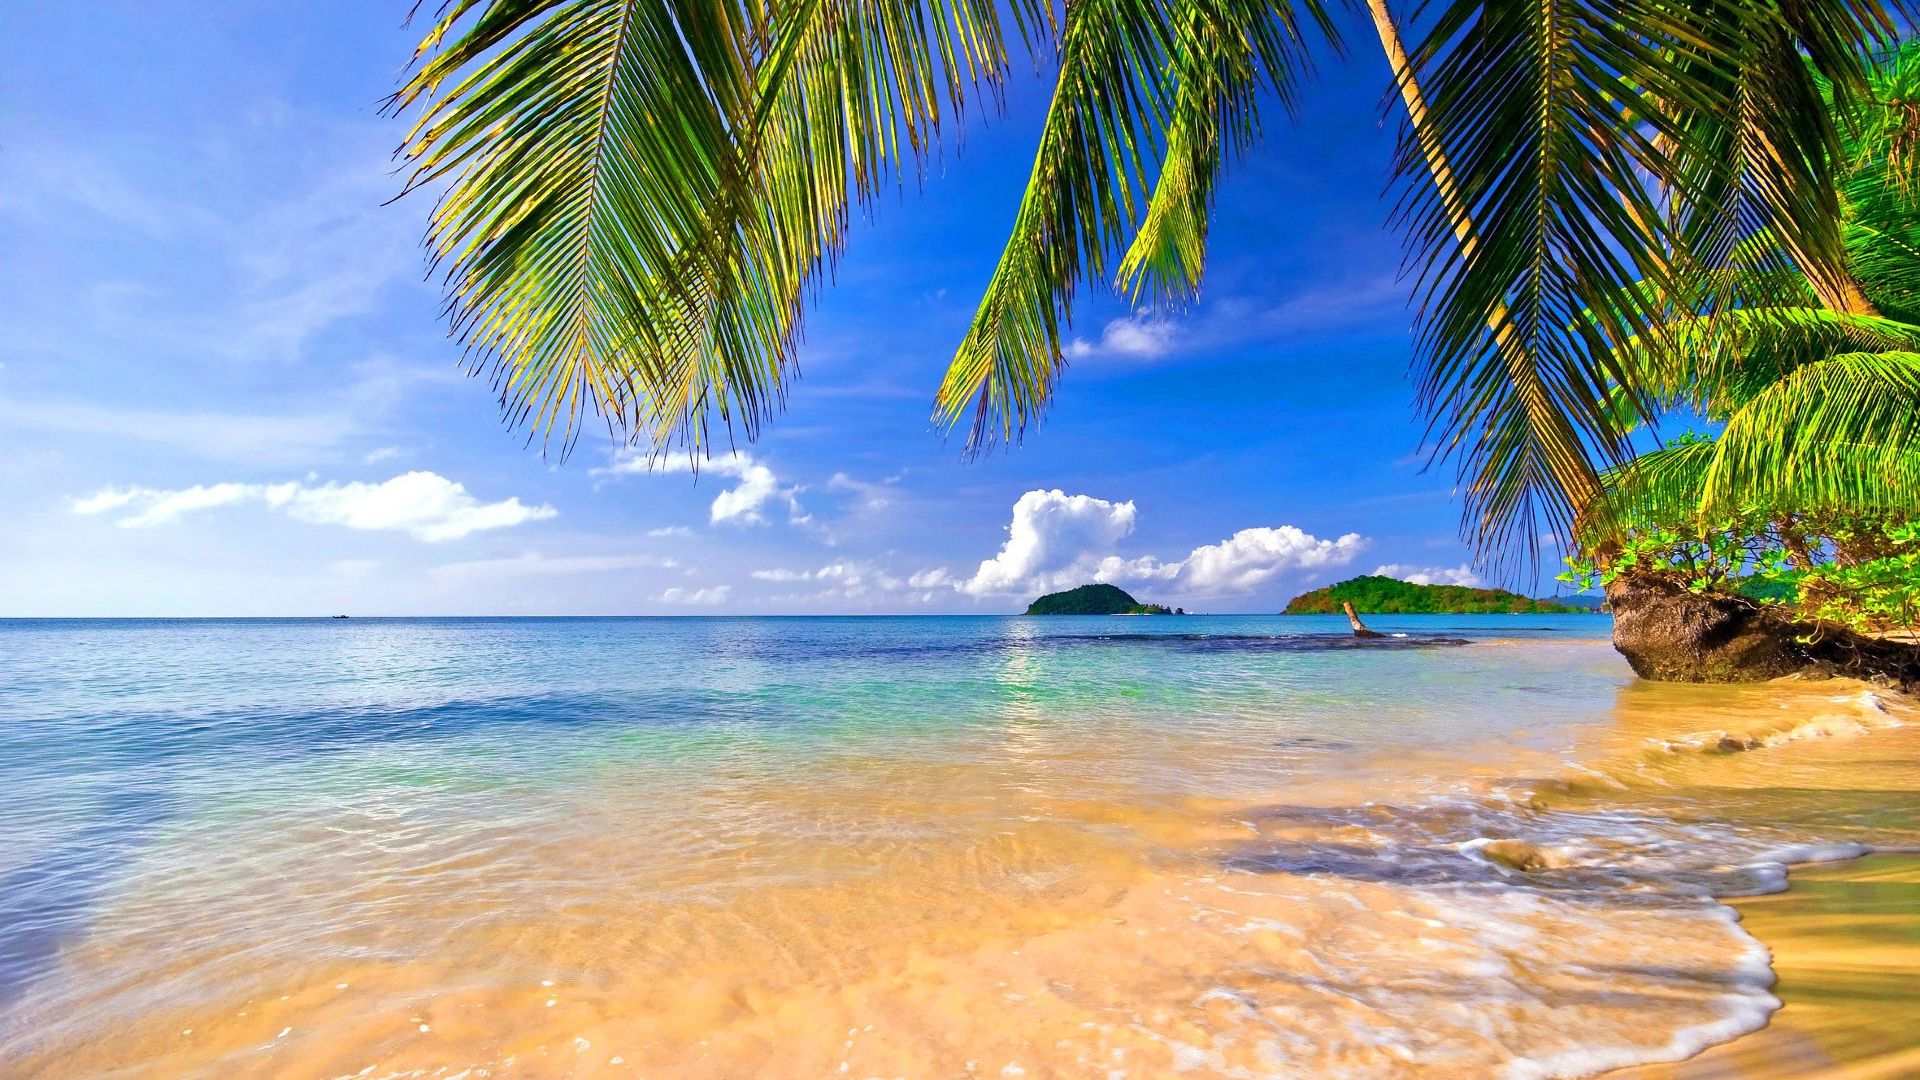 Desktop Wallpaper Palm Tree And Beach, Hd Image, Picture, Background, Fmko2x